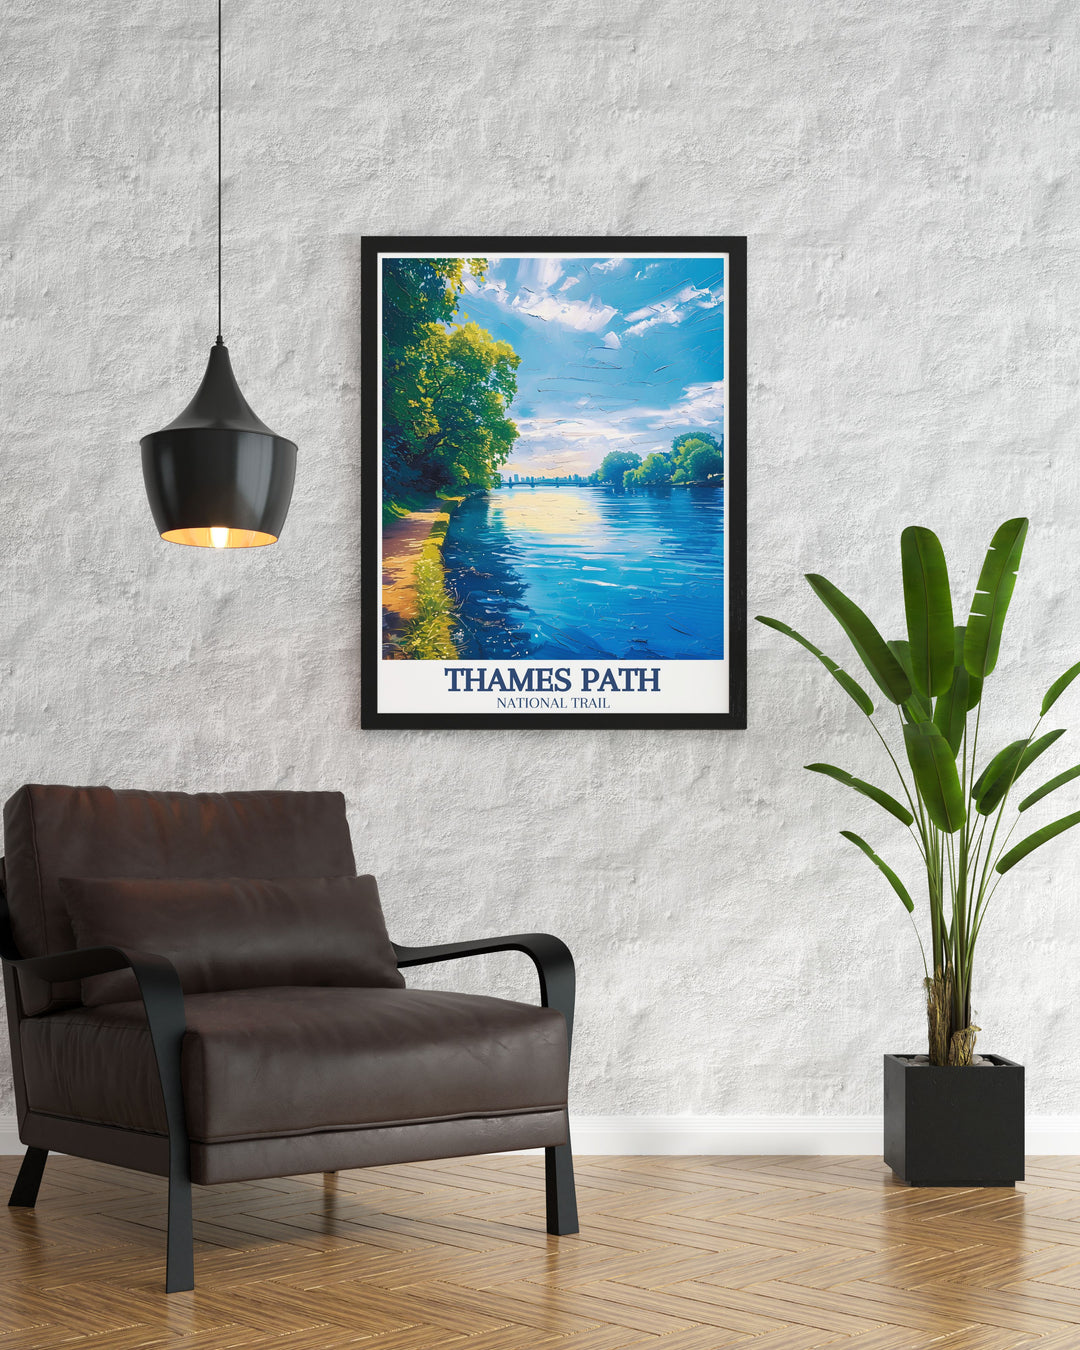 Beautifully framed print of the River Thames highlighting the scenic views of the Thames Path in Richmond this poster is a must have for any art collection and an excellent addition to home decor